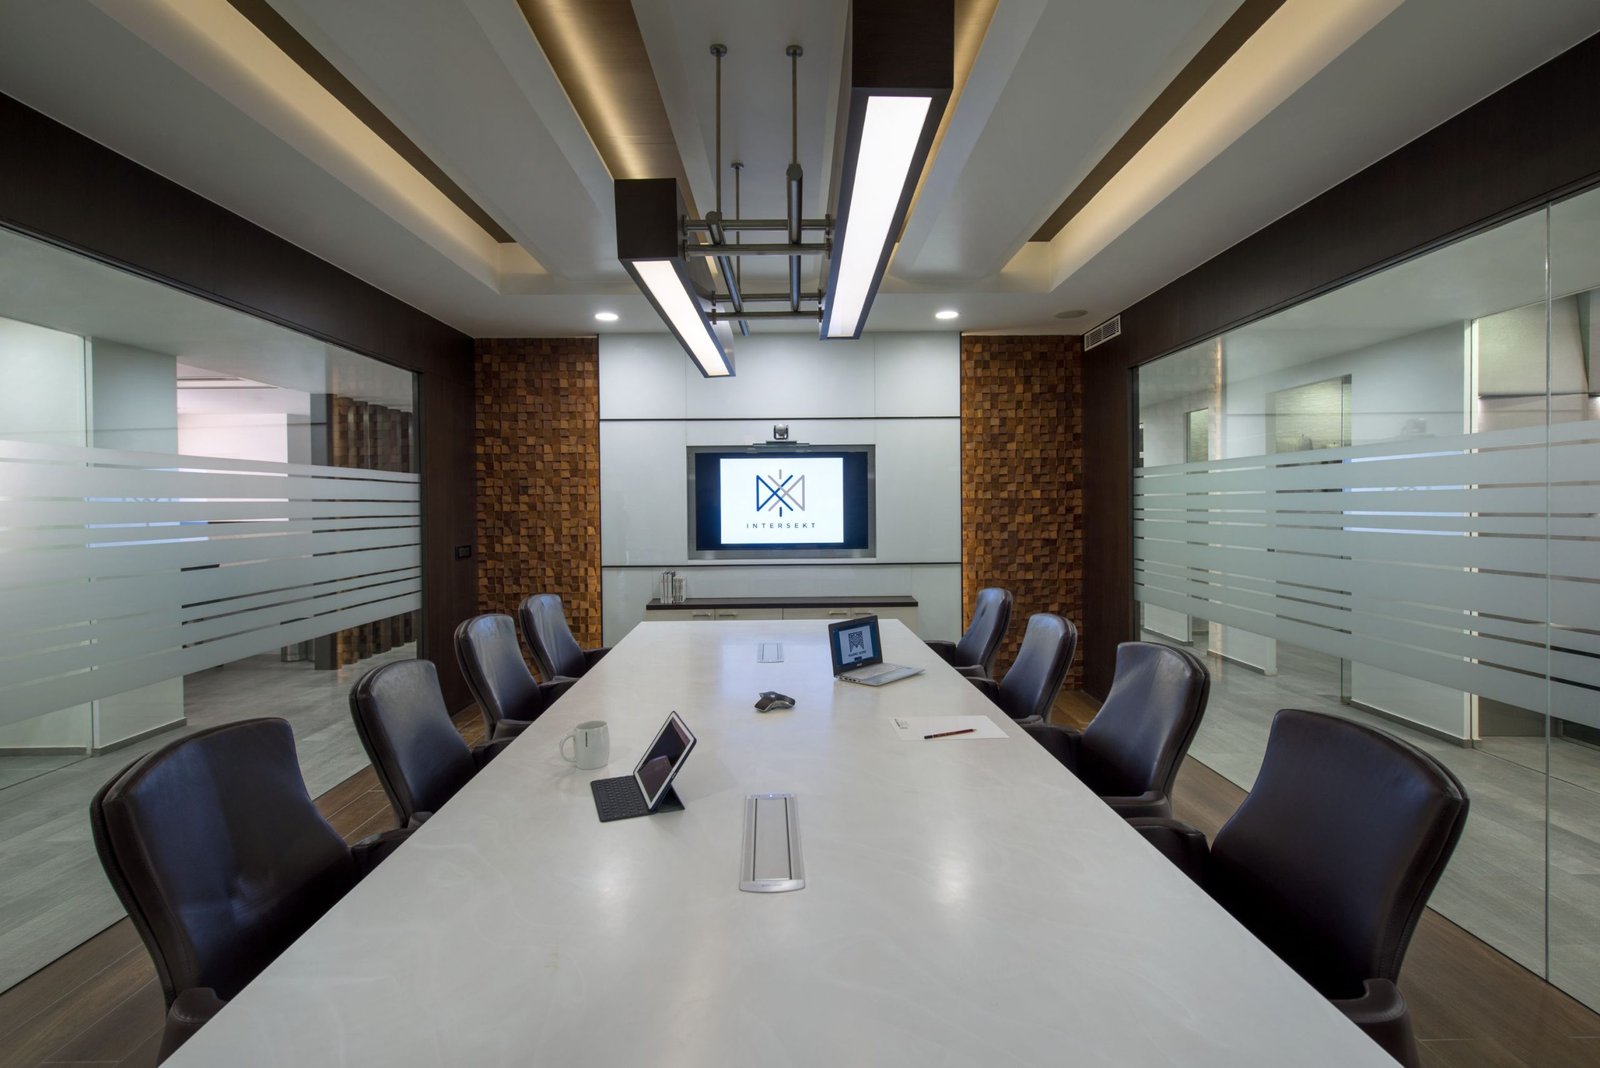 5. Conference room